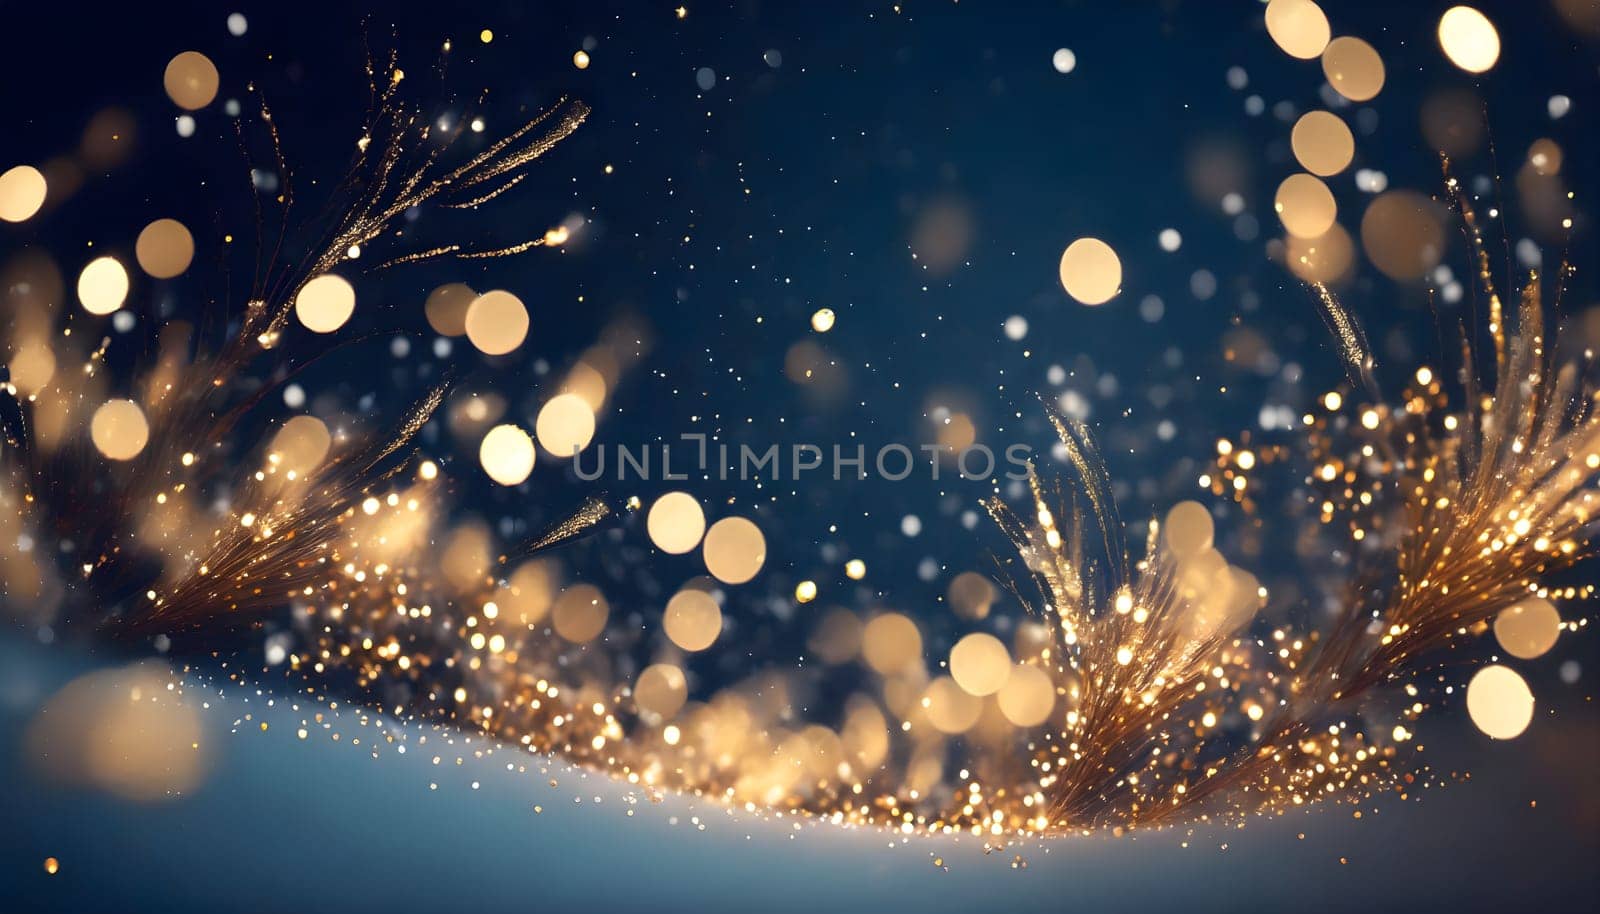 A stunning winter wonderland with golden particles dancing in the air, creating a mesmerizing bokeh effect against a deep navy background.